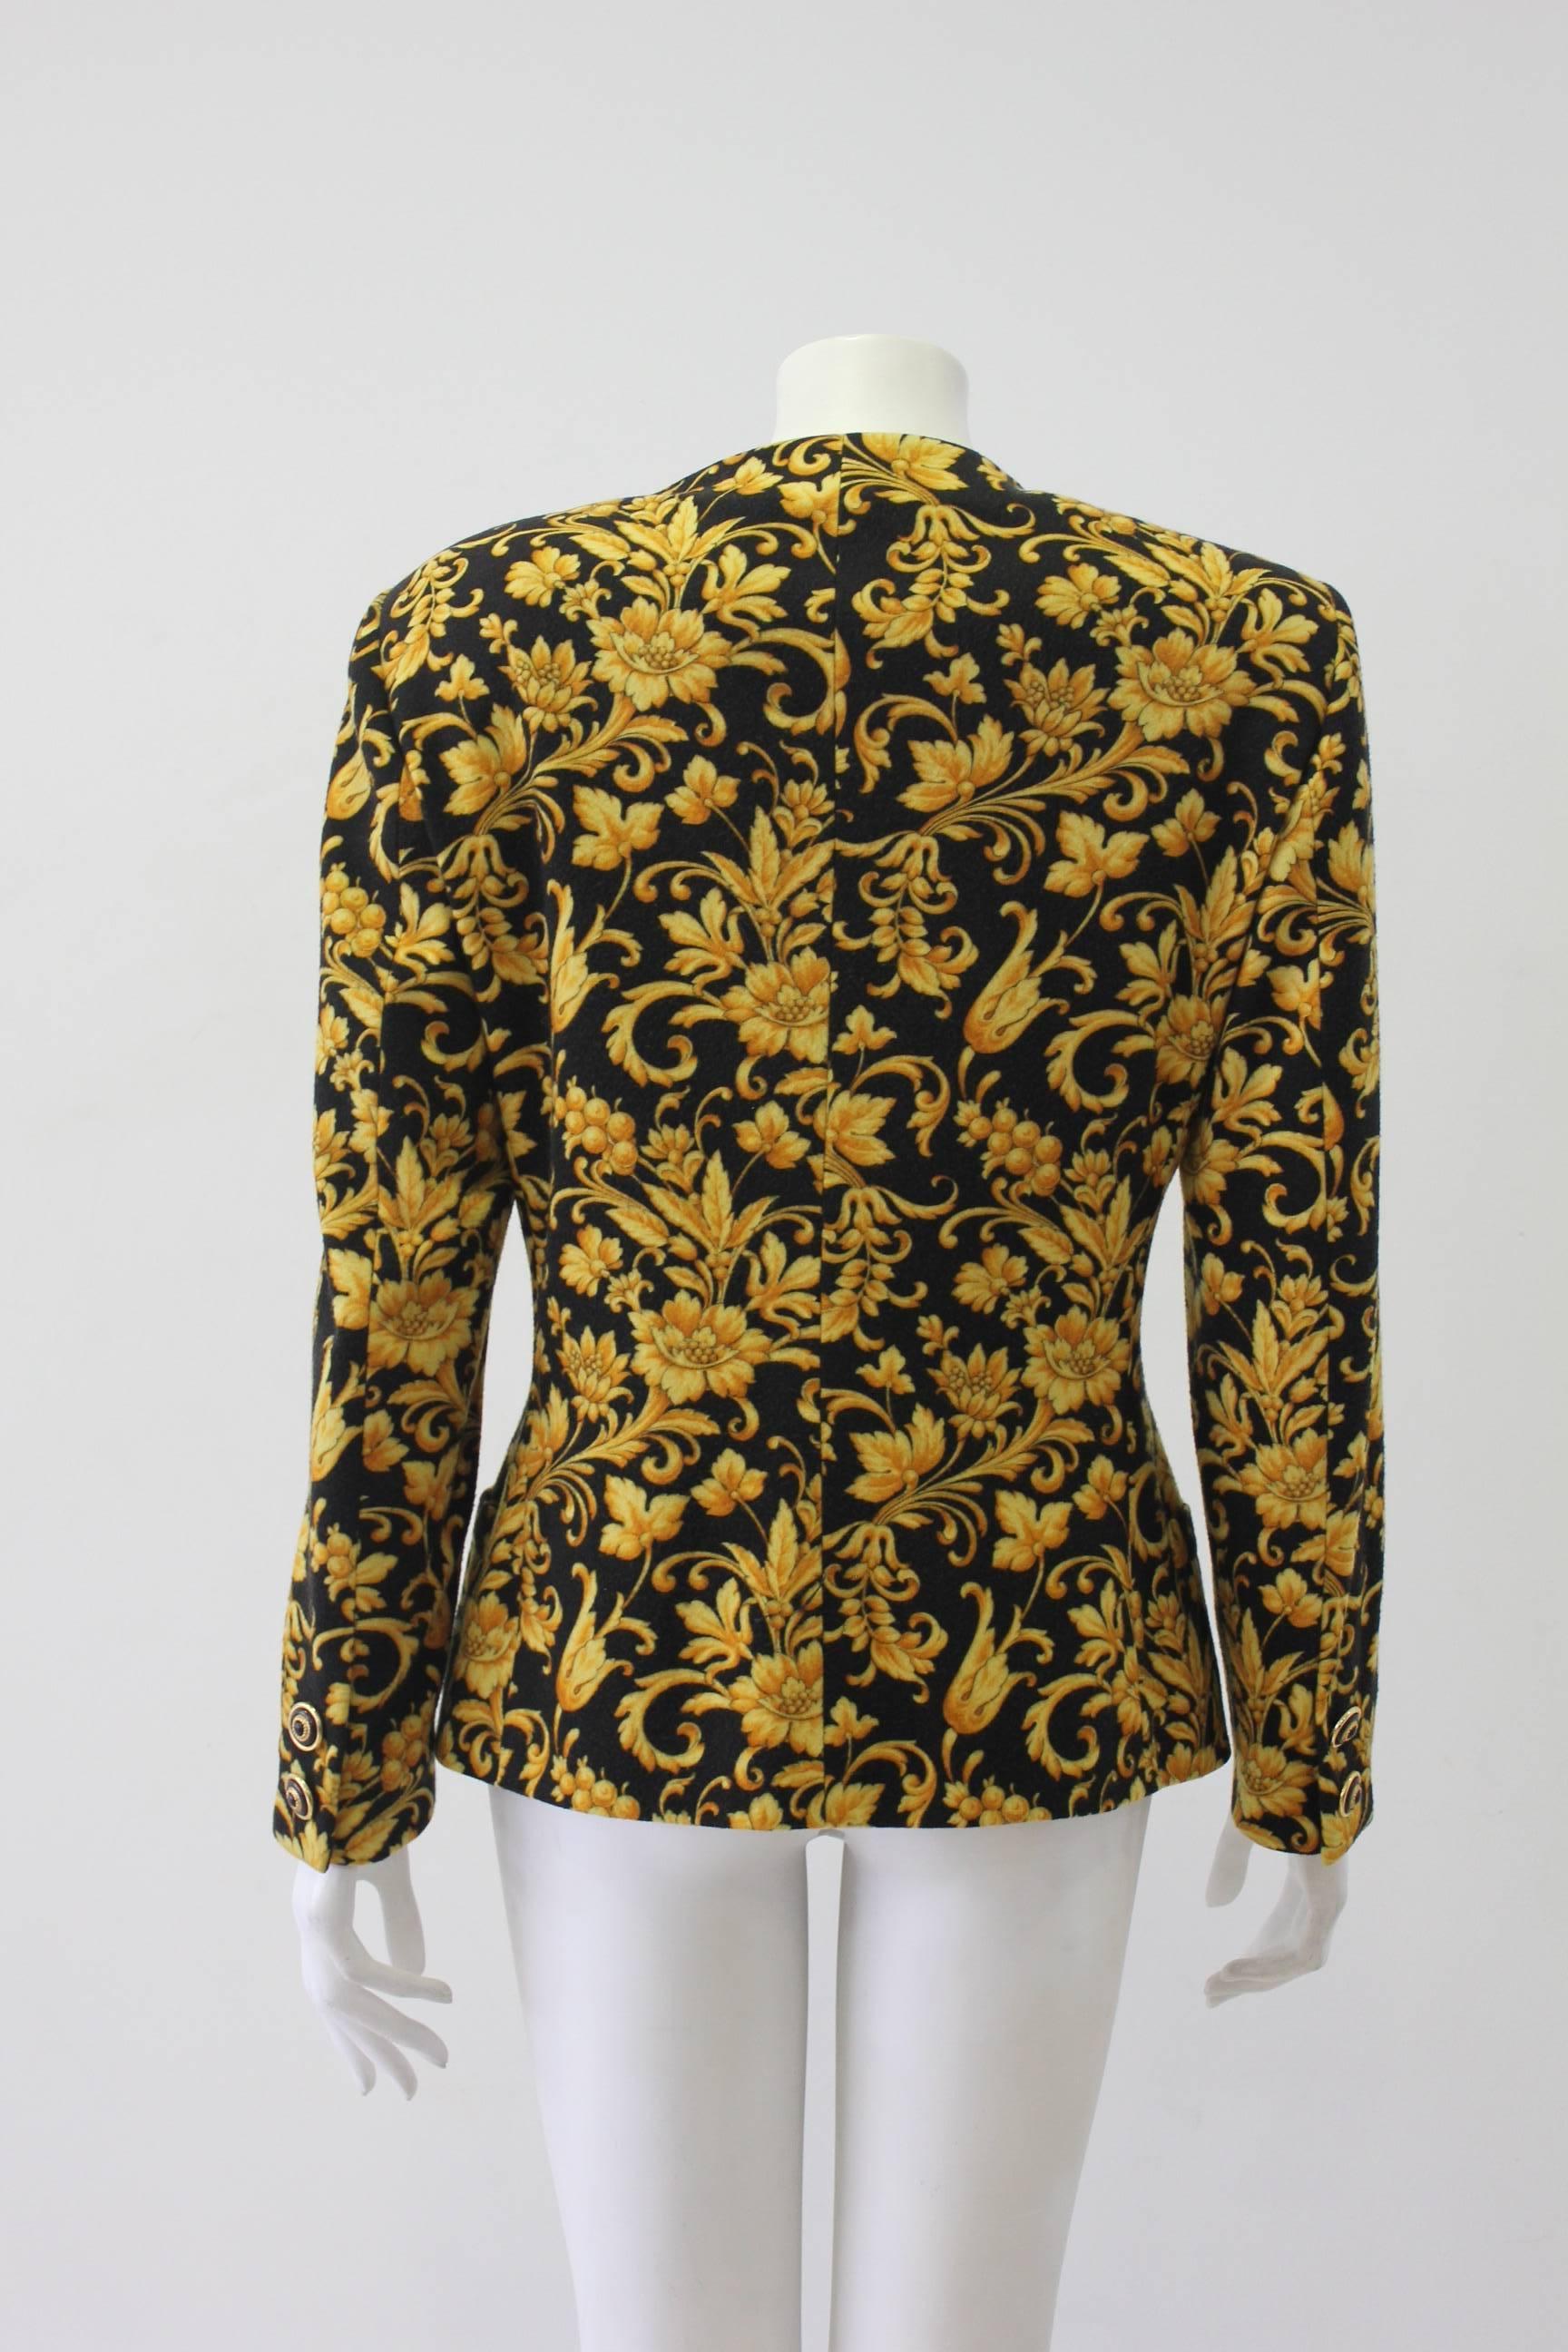 Gianni Versace Baroque Printed Jacket Fall 1991 For Sale 1